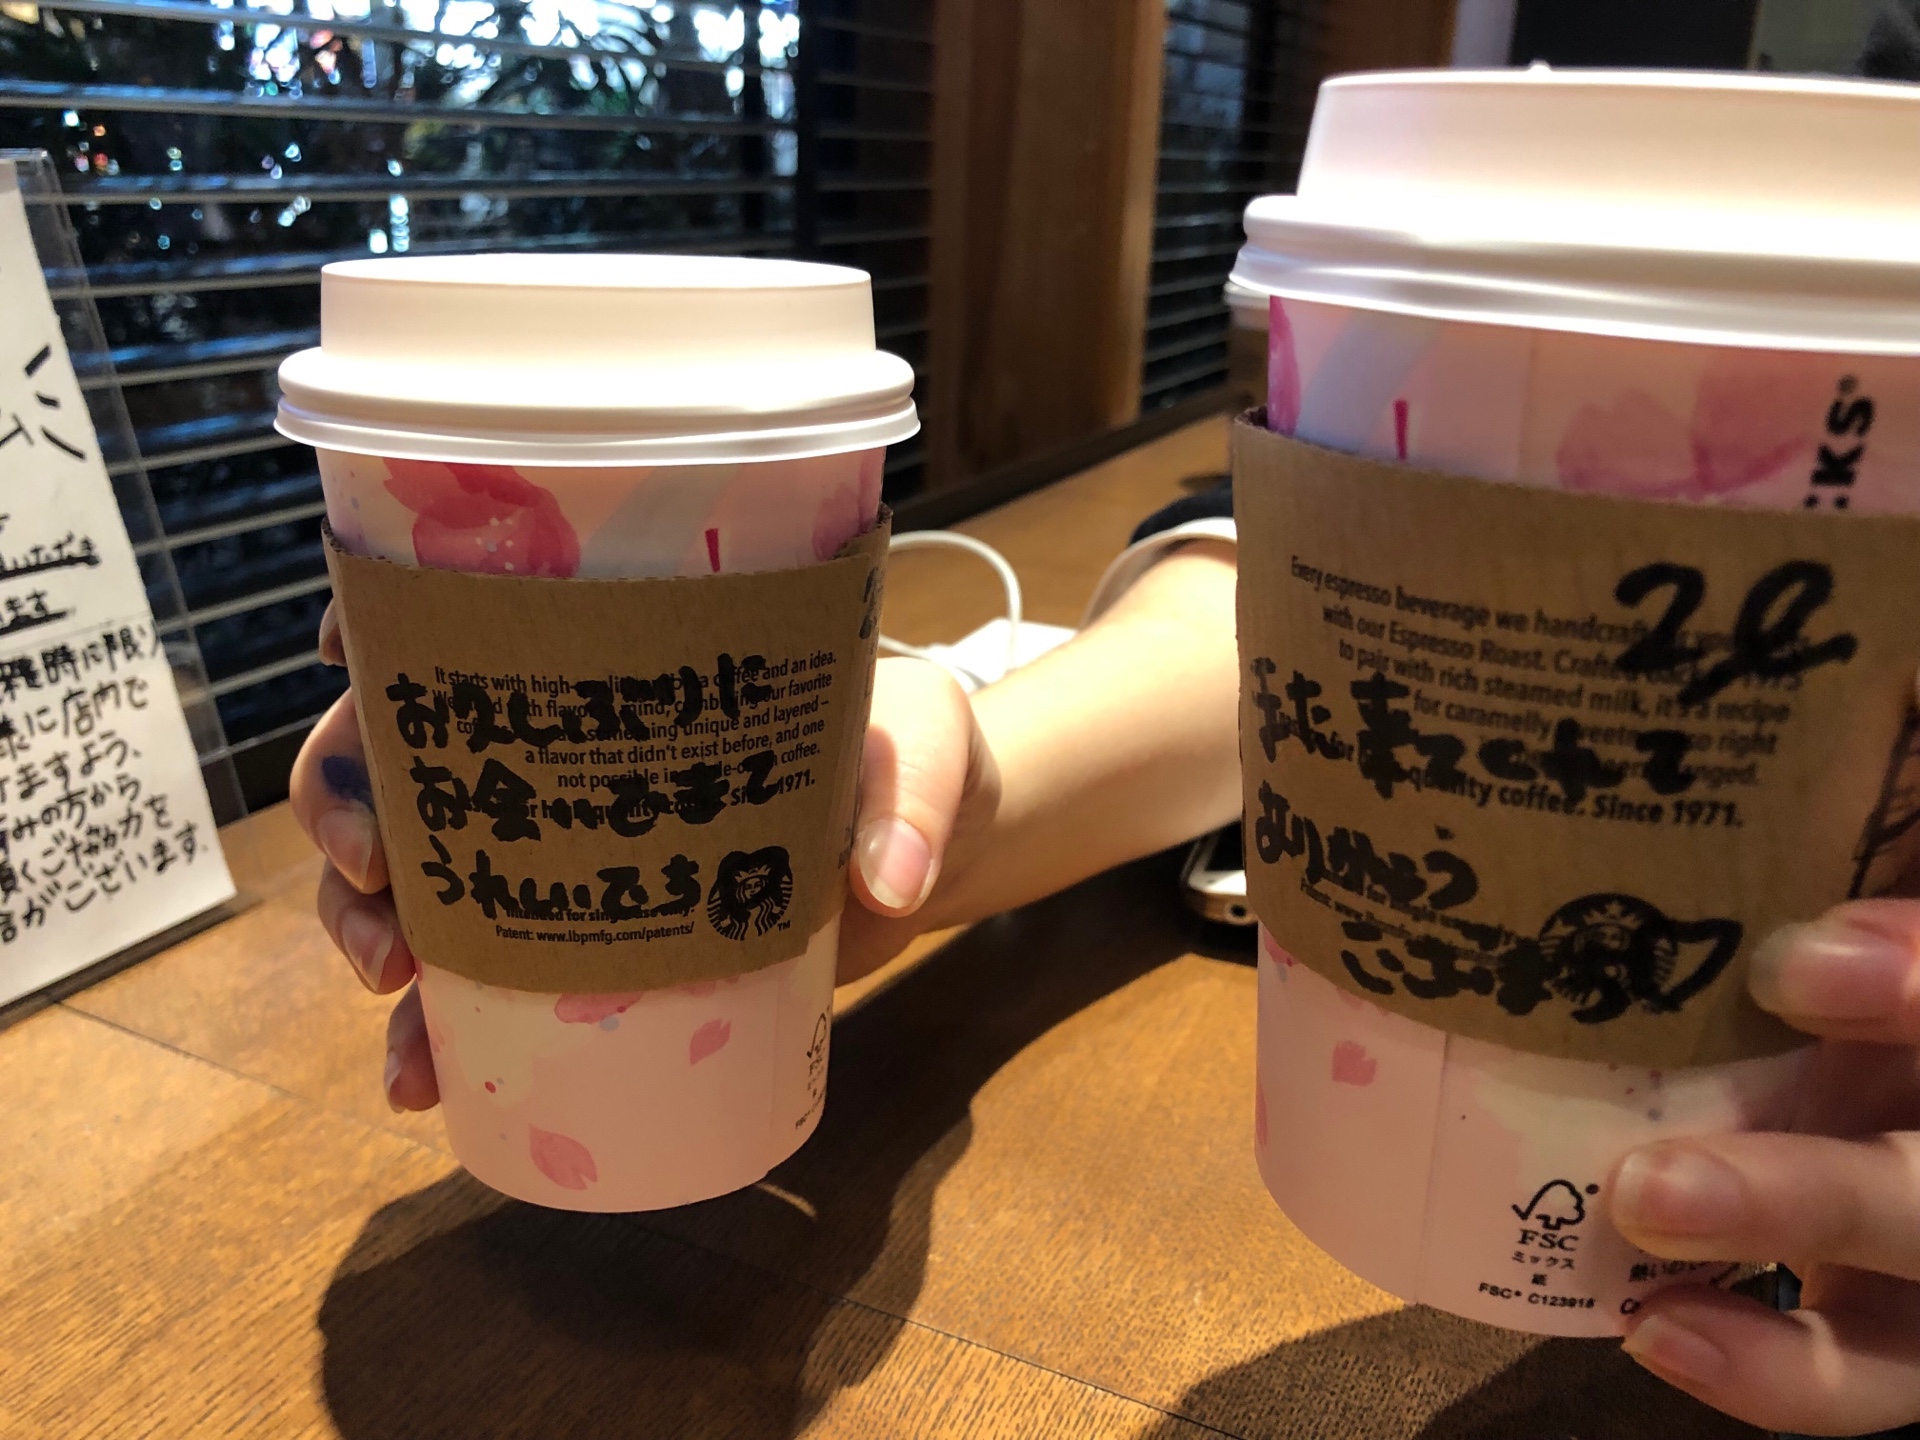 End of February, begin of March the shops start selling items featuring sakura flavor/smell/style. Example: Starbucks' Sakura Cafe Latte or the Sakura Frappuccino. DELICIOUS!